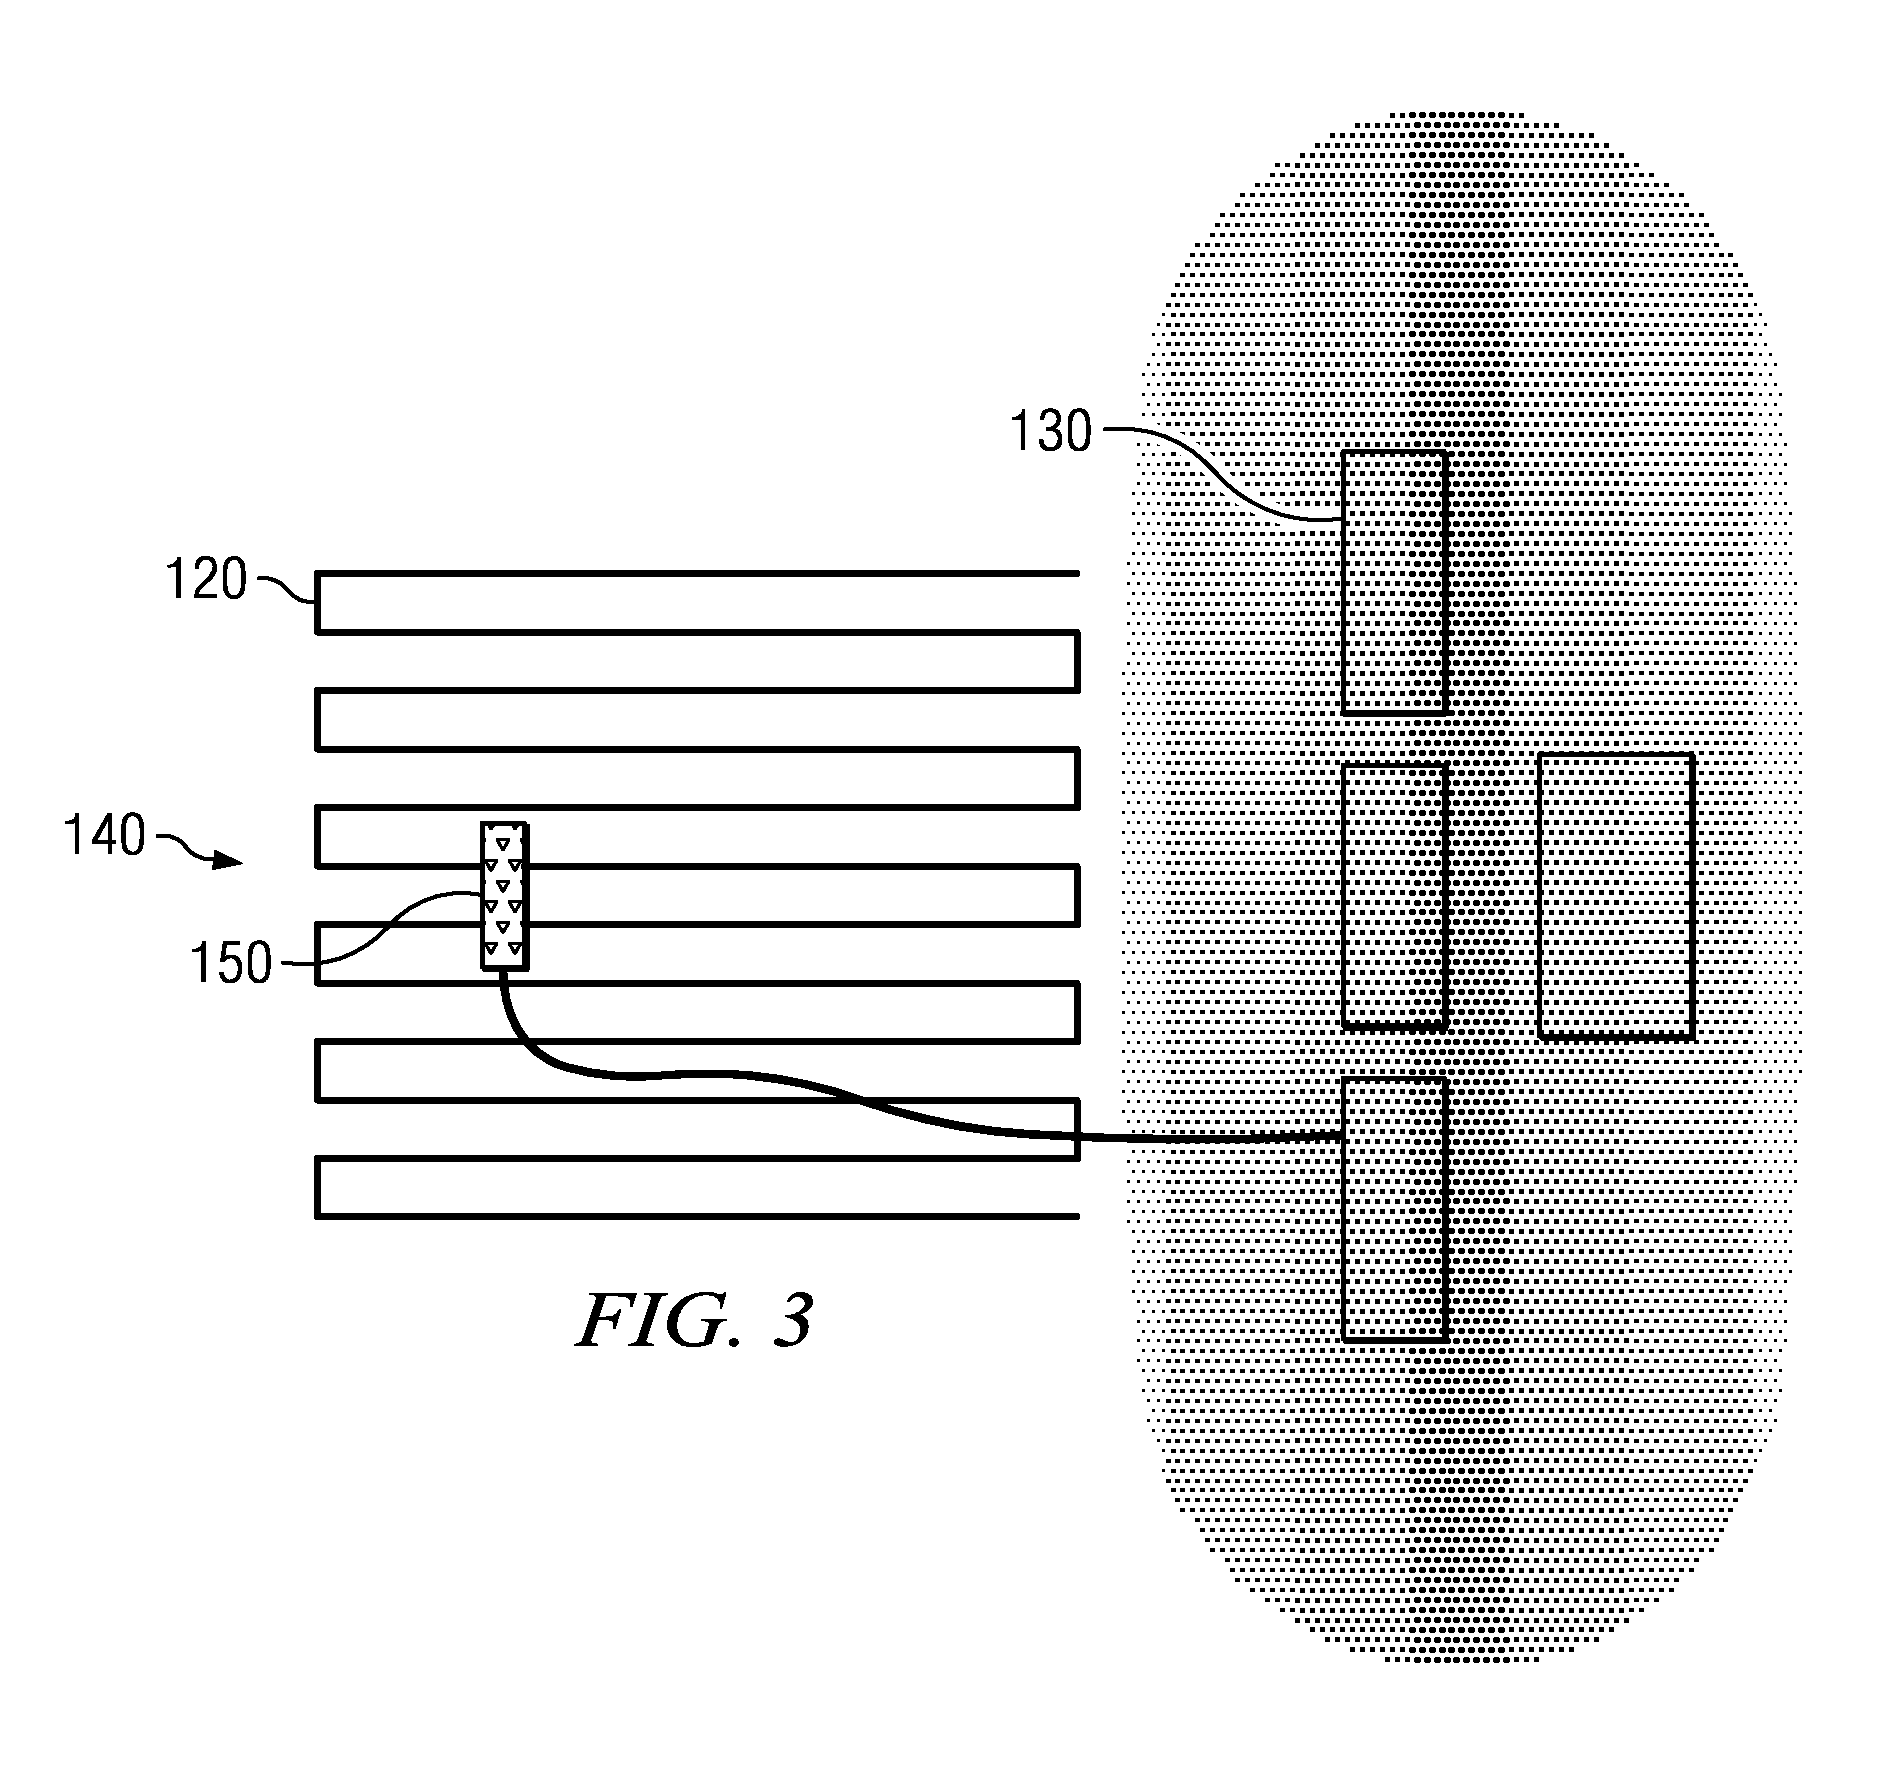 Method for improving wellbore survey accuracy and placement